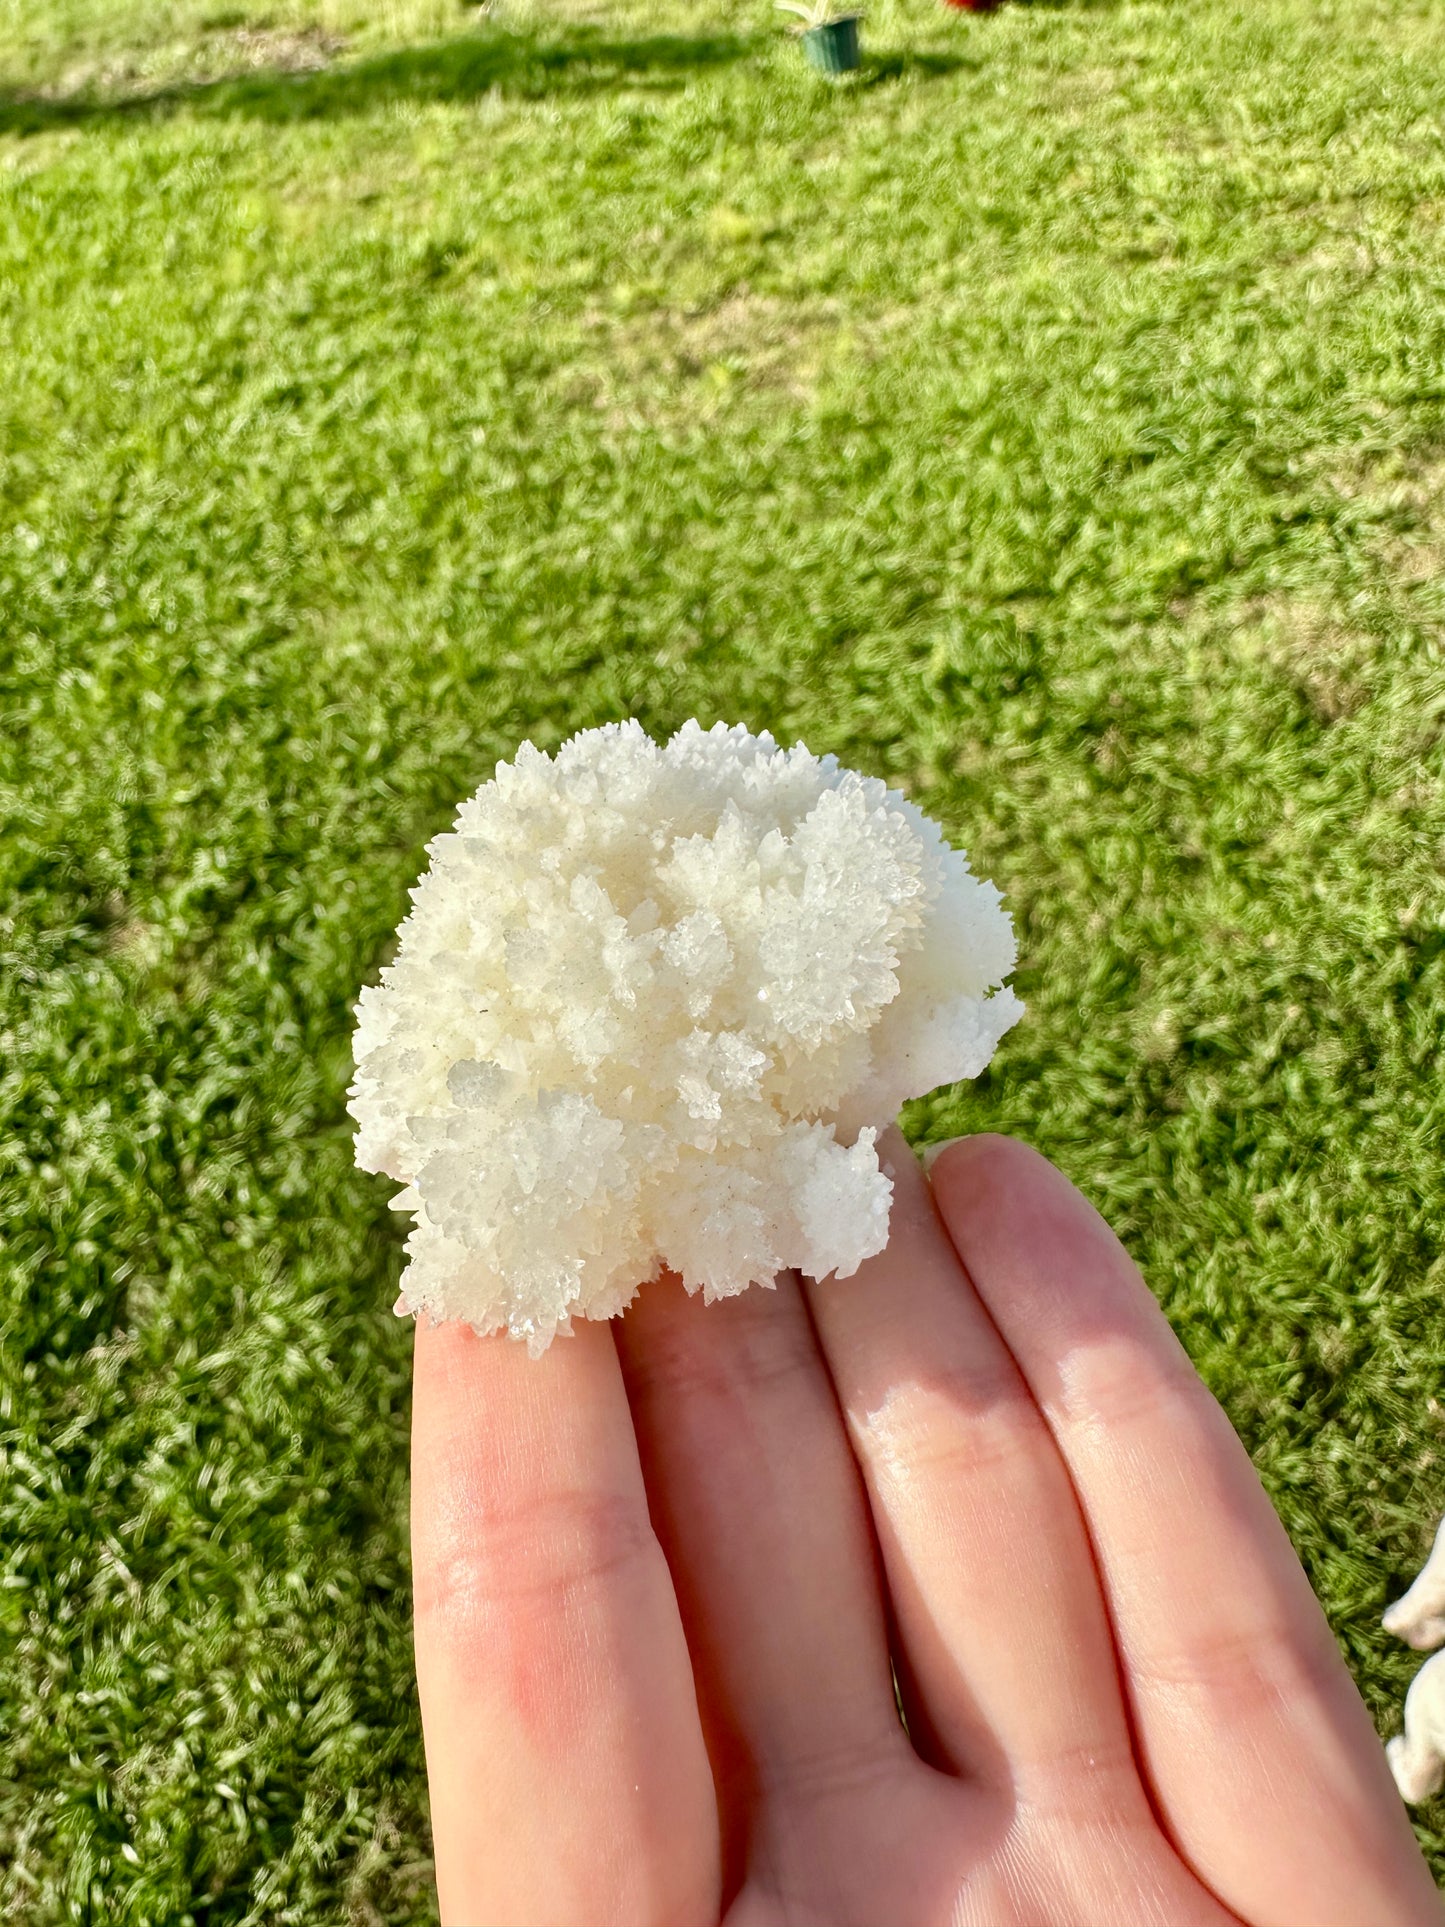 Aragonite Specimen - Stunning Natural Crystal for Collection, Perfect for Home Decor and Meditation, Enhances Earth Connection